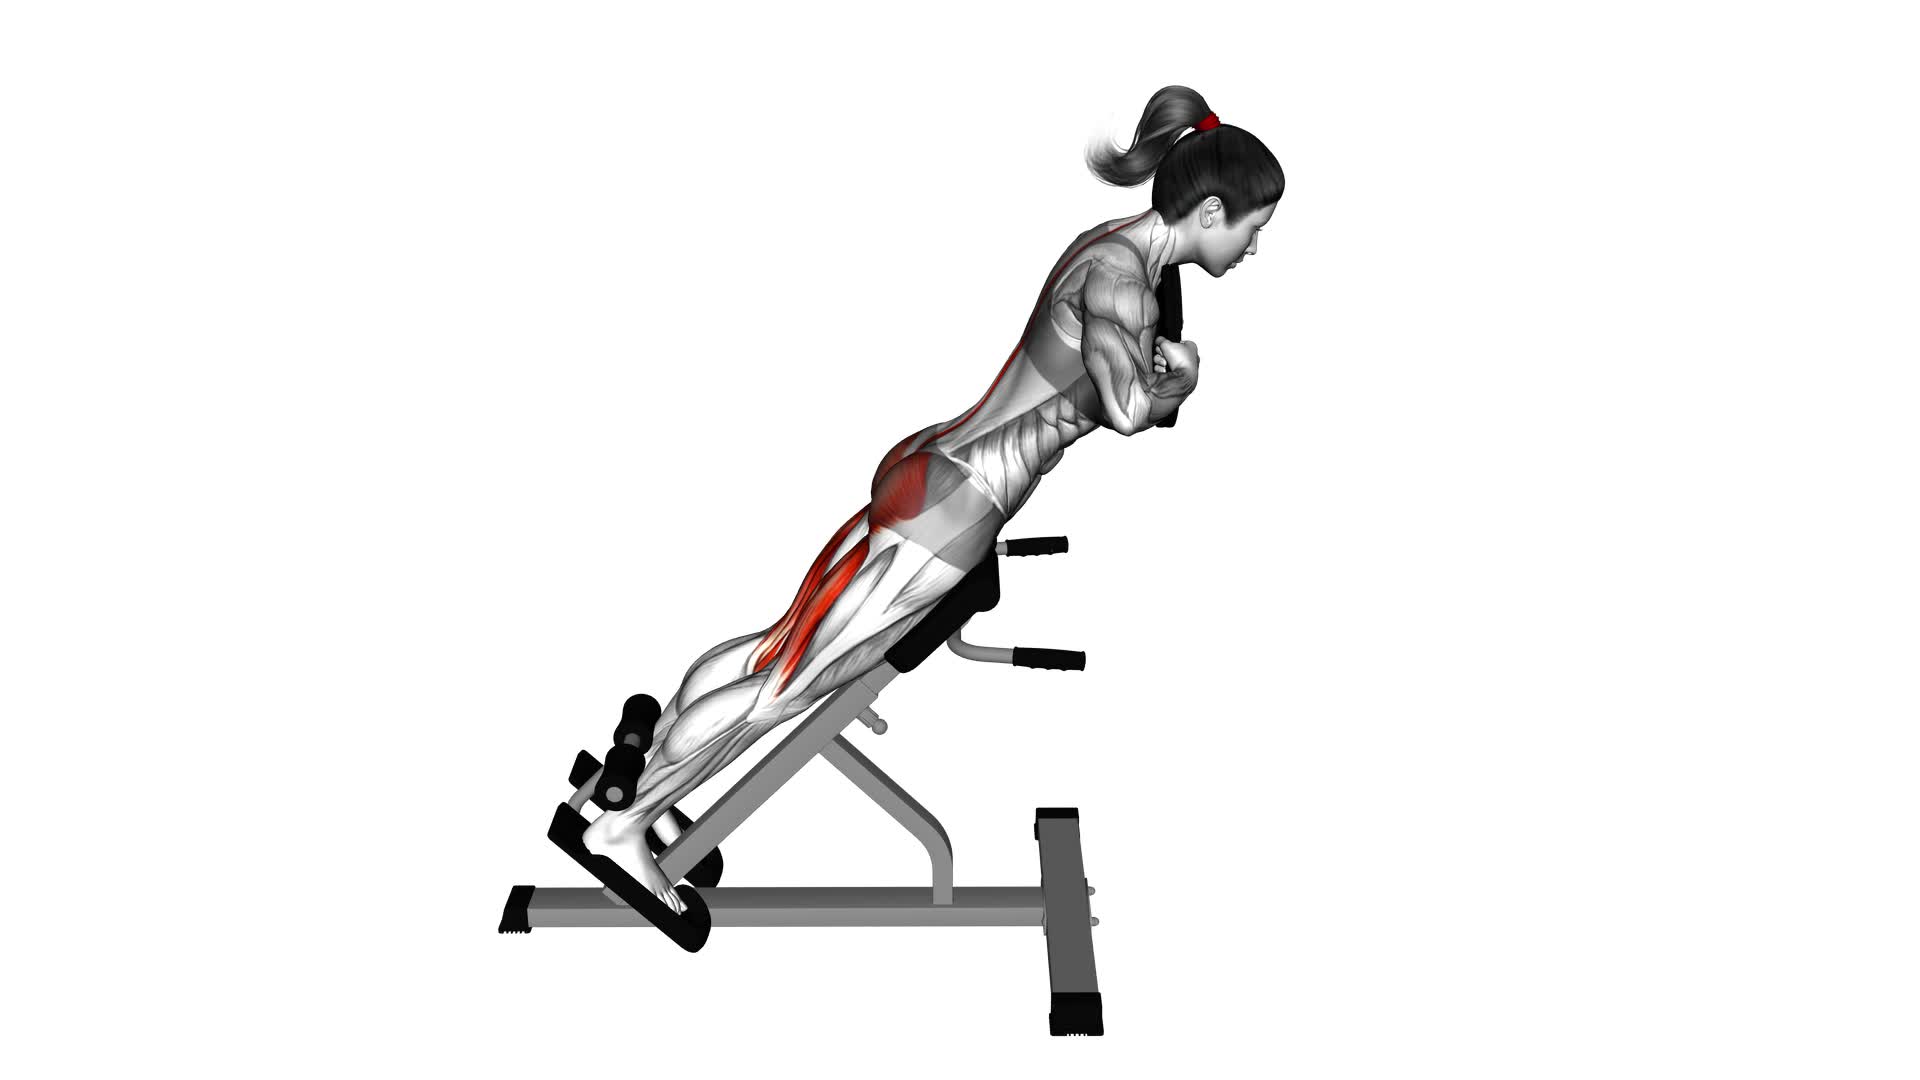 Weighted Hyperextension (female) - Video Exercise Guide & Tips